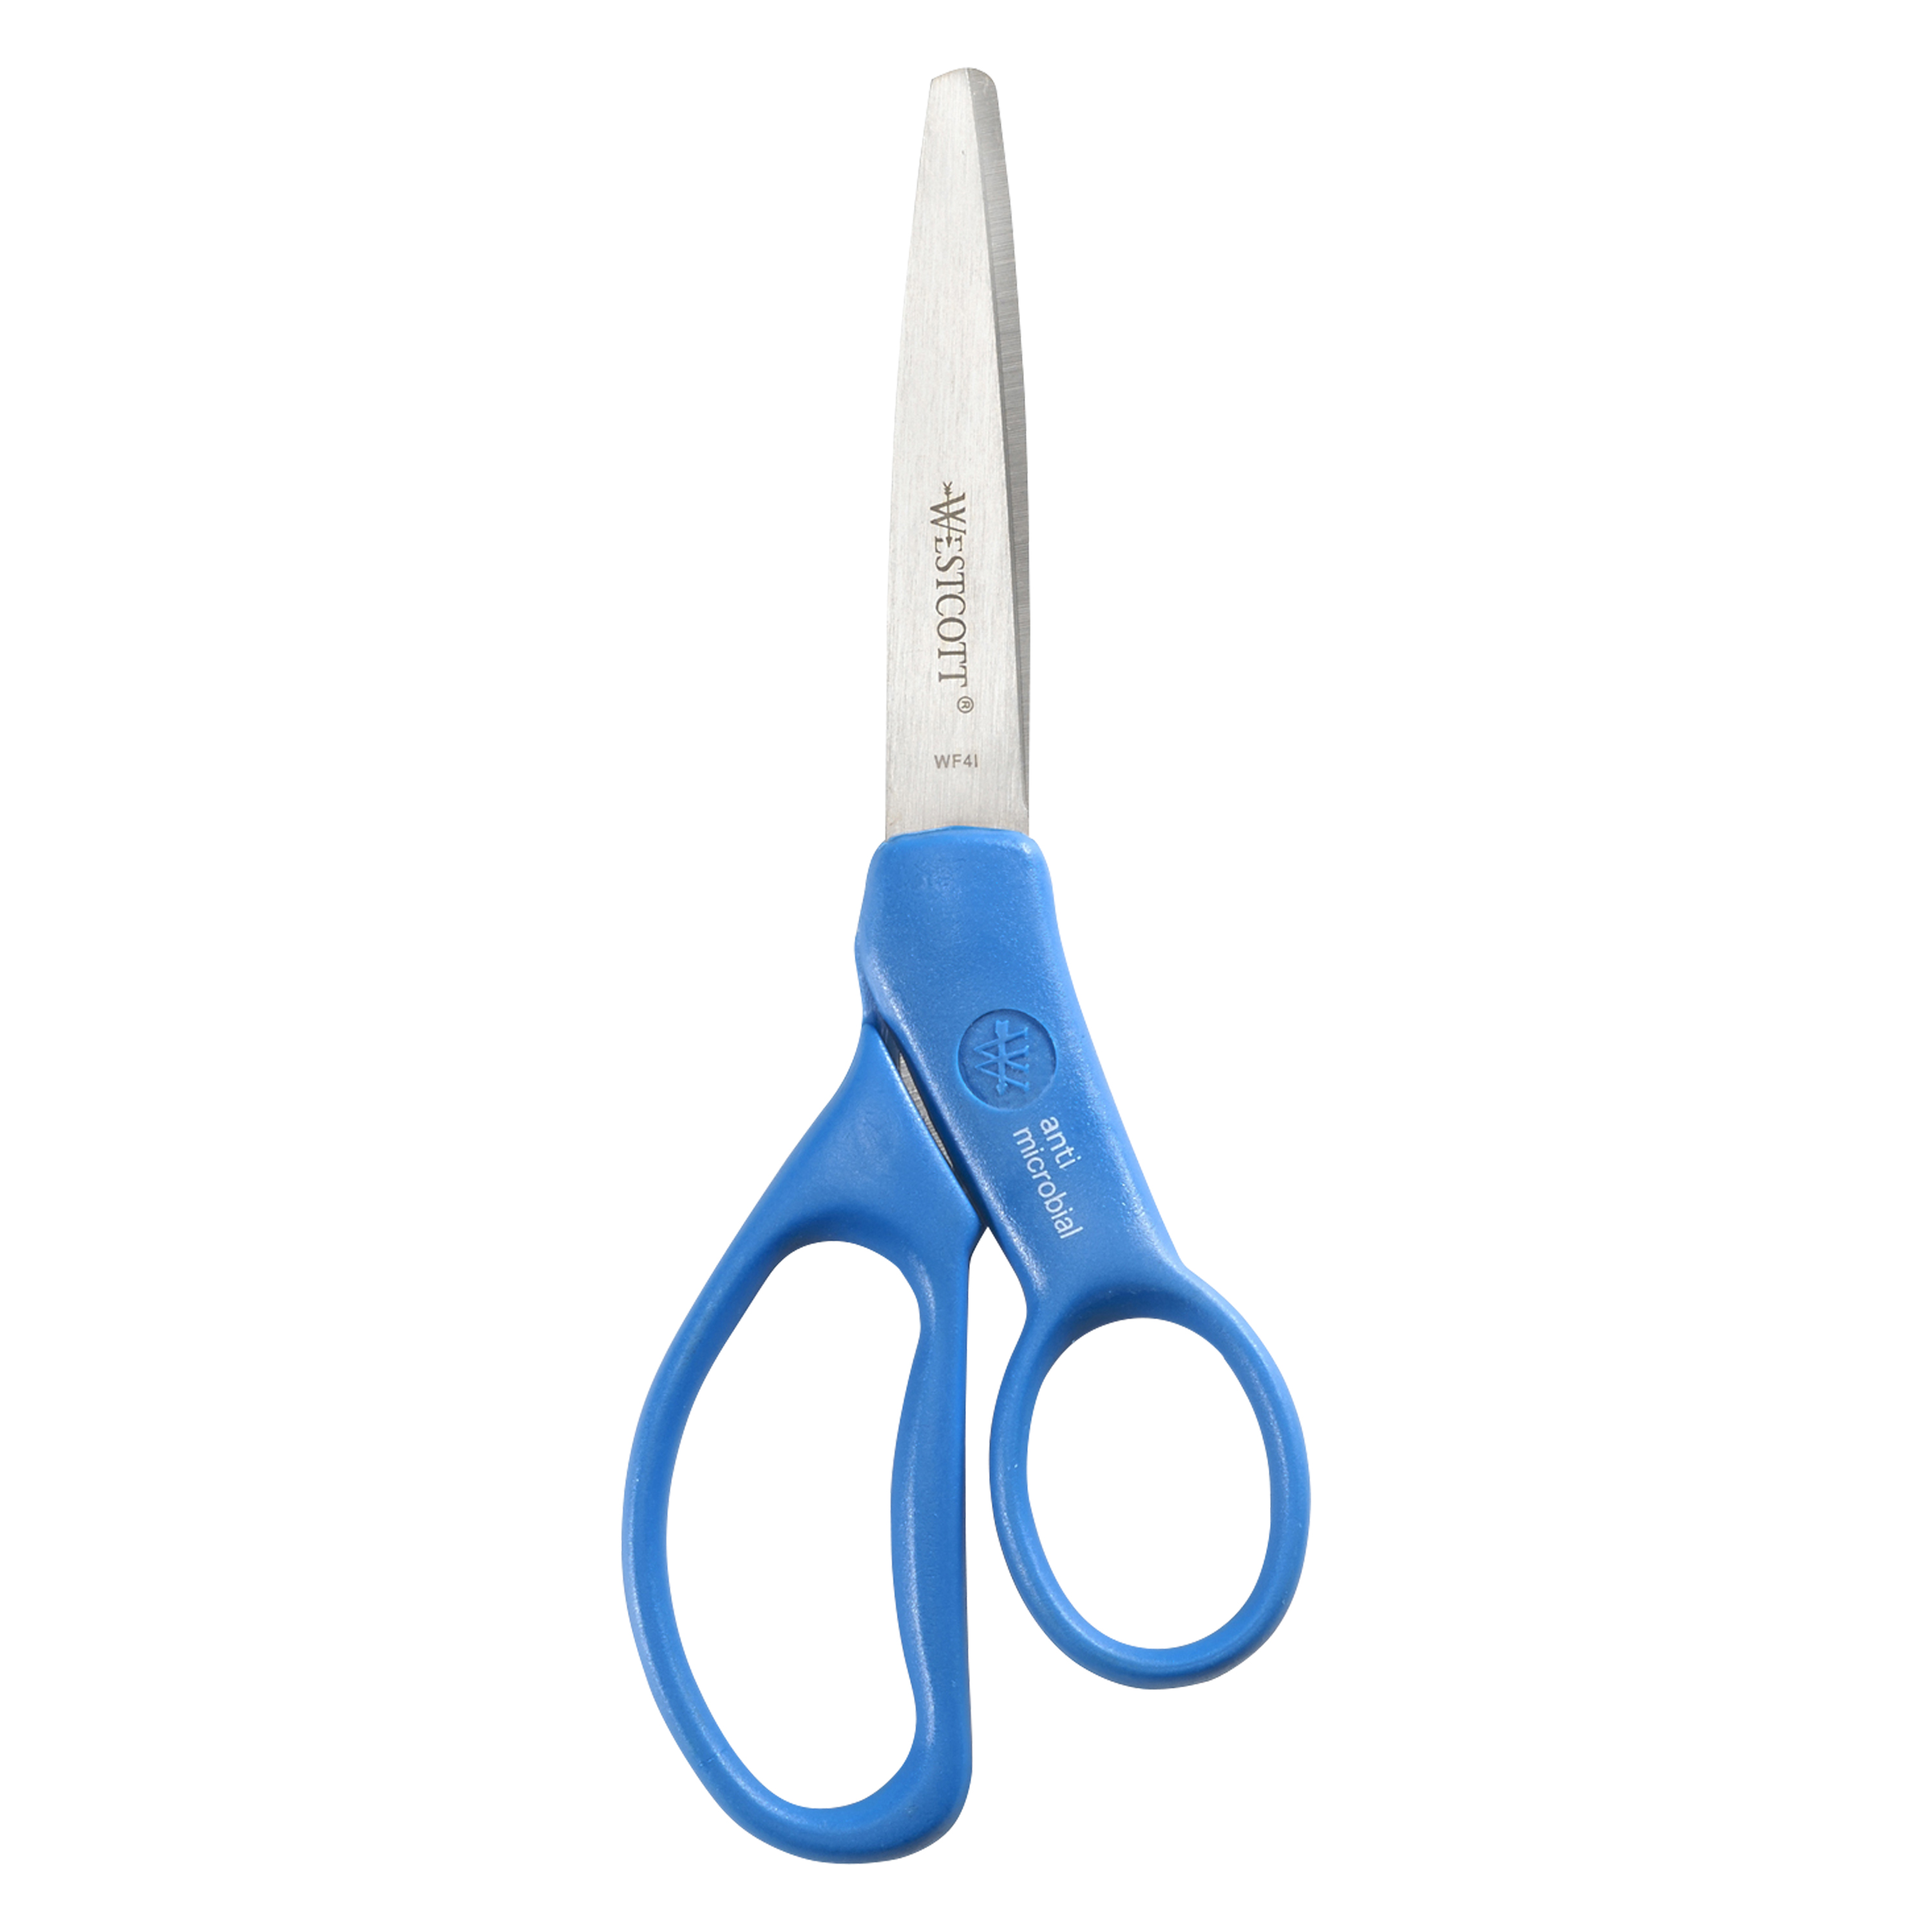 Westcott 7" Student Scissors with Anti-Microbial Protection, Multi-Color, 1 Count - image 1 of 8